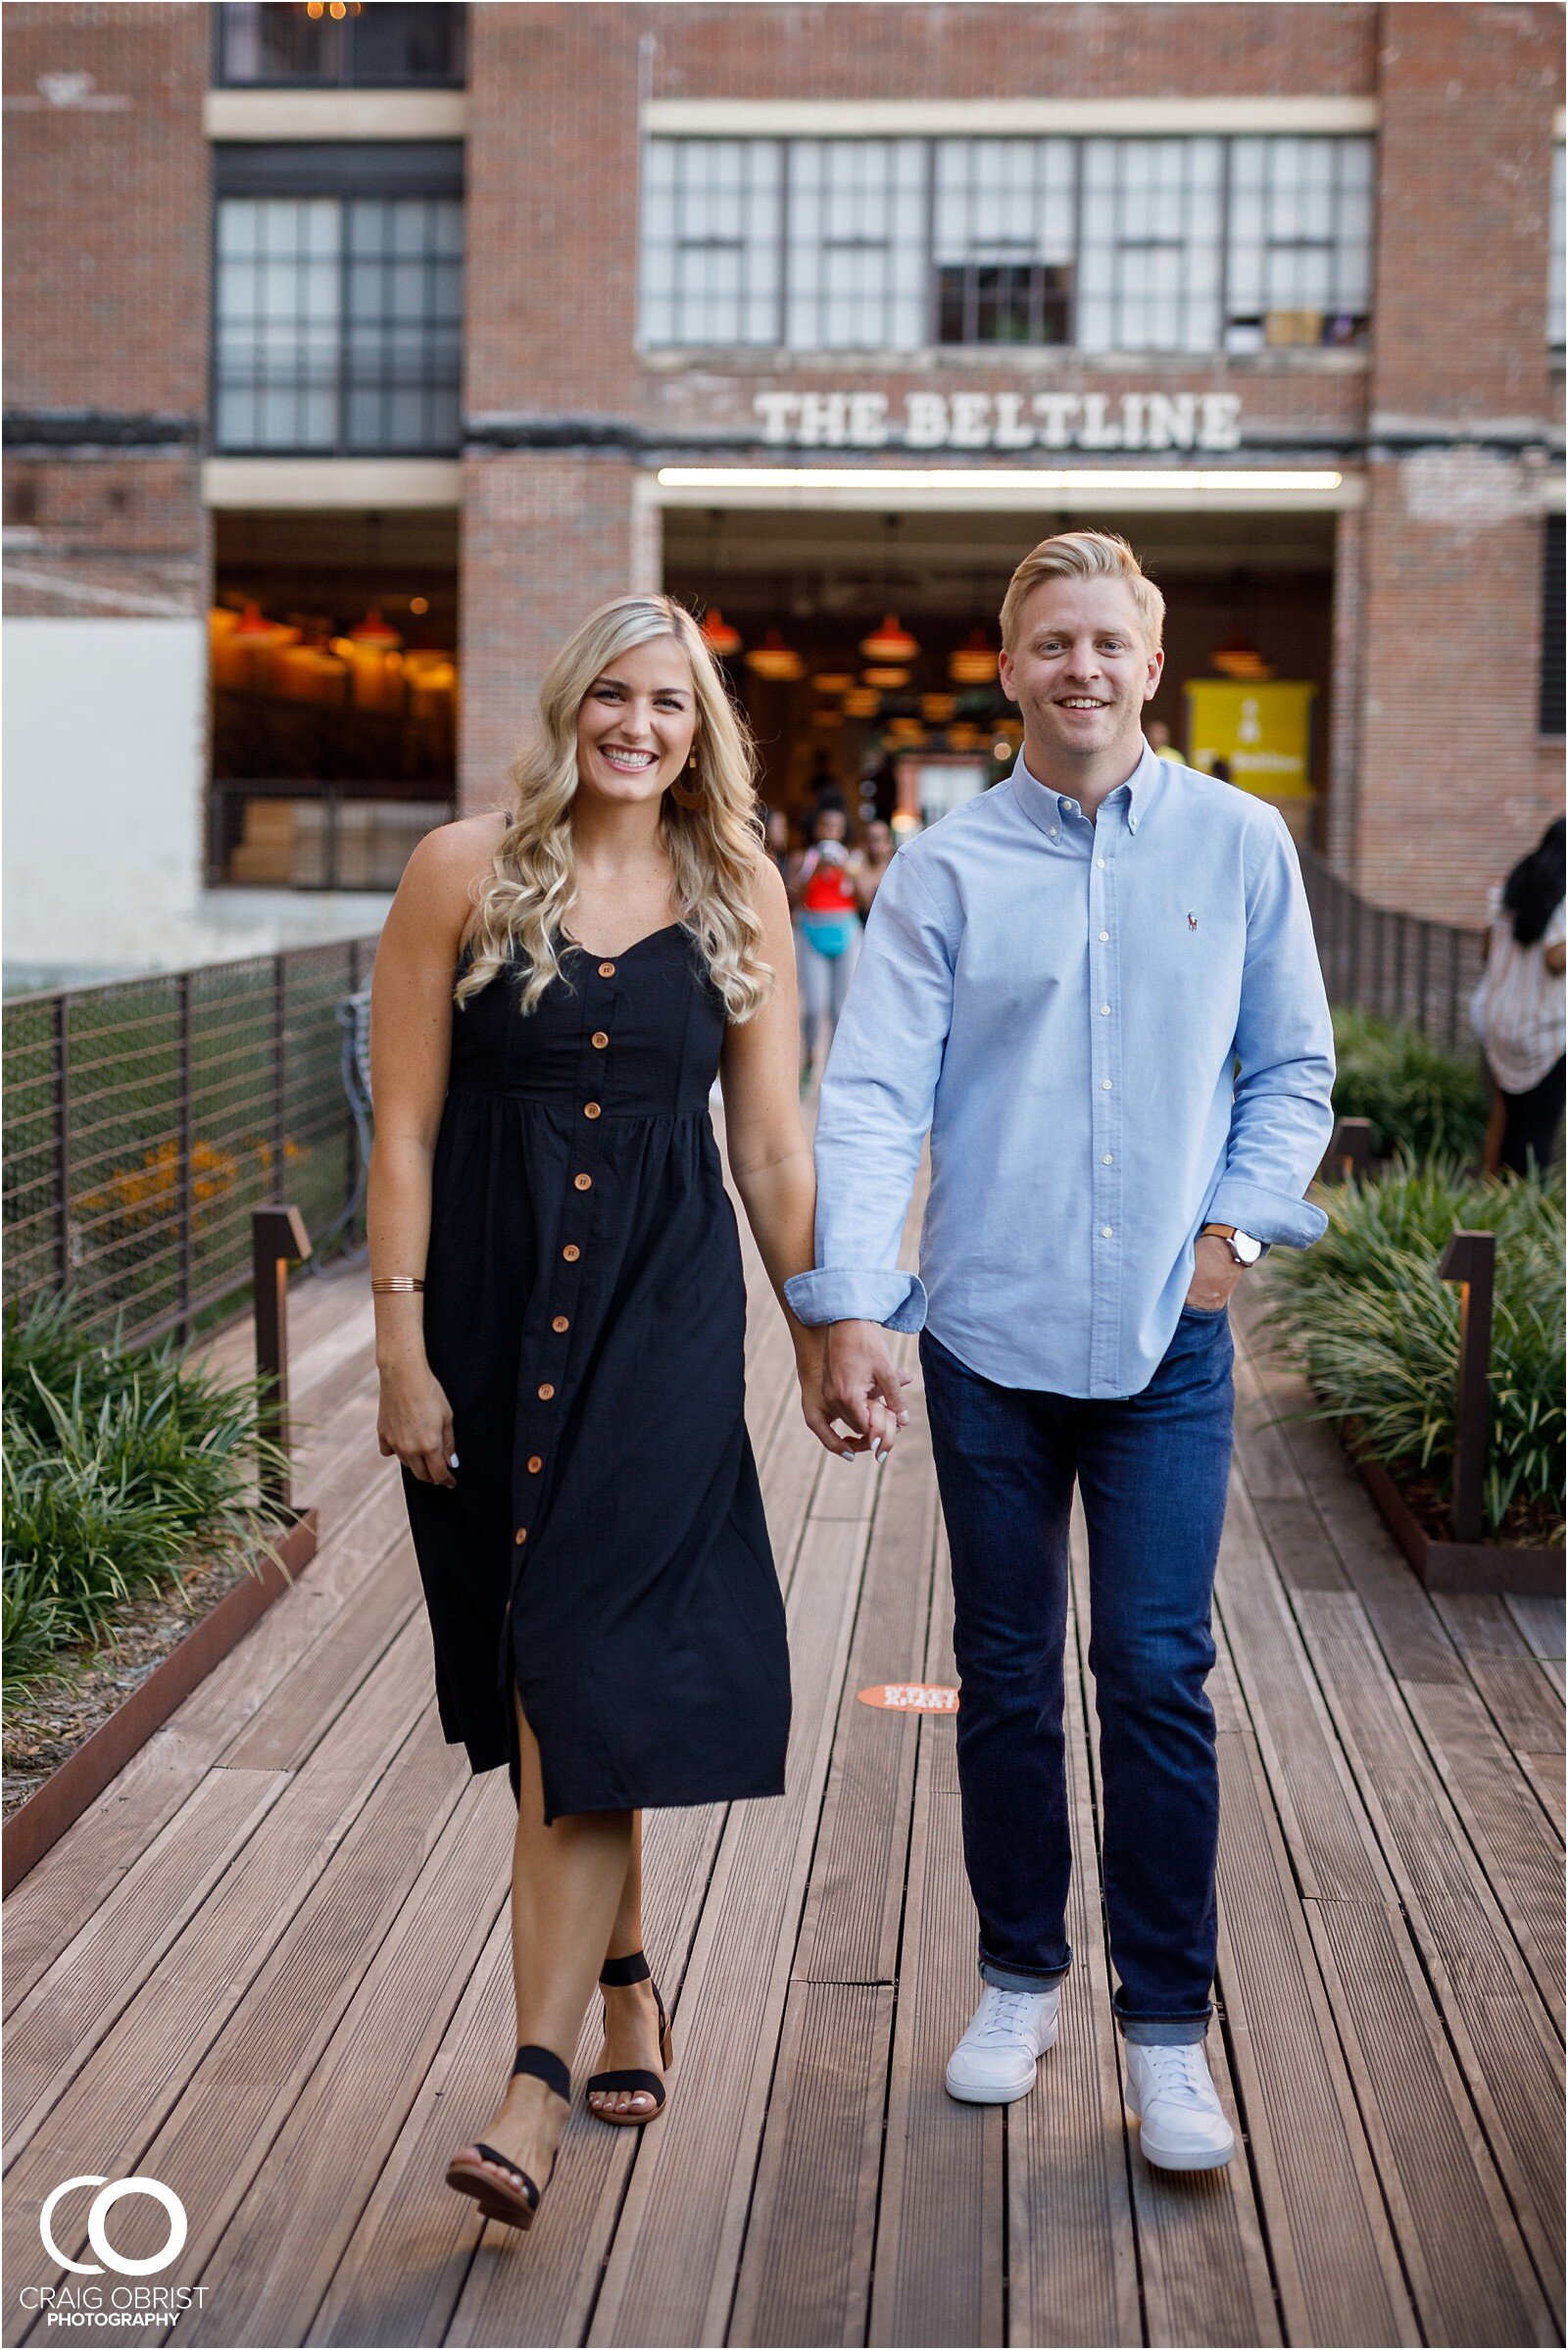 Cator Woolford Ponce city market rooftop sunset engagement portraits atlanta_0029.jpg